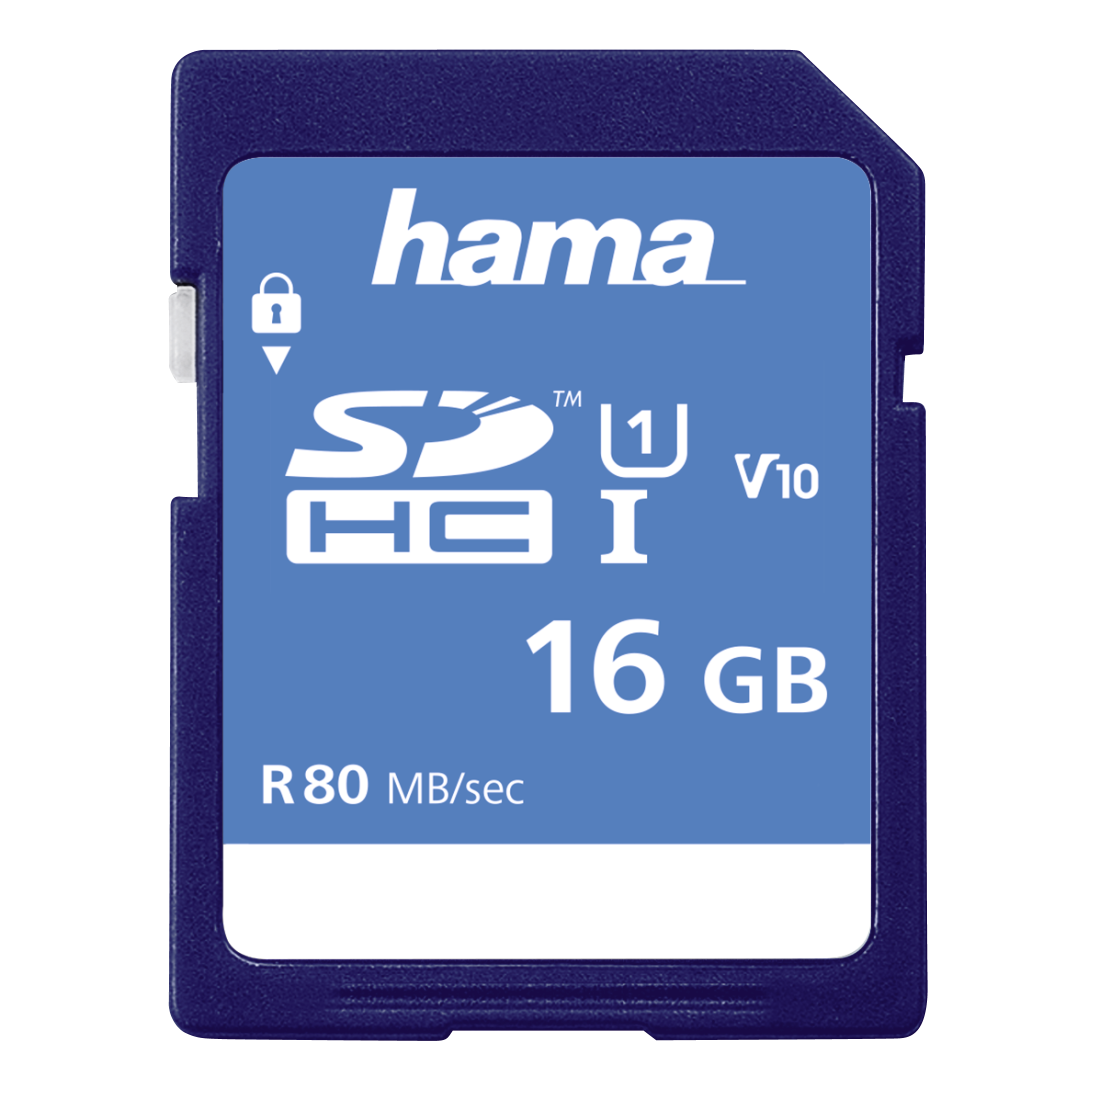 You Recently Viewed Hama 16GB Class 10 SDHC, UHS-I 80MBs Image